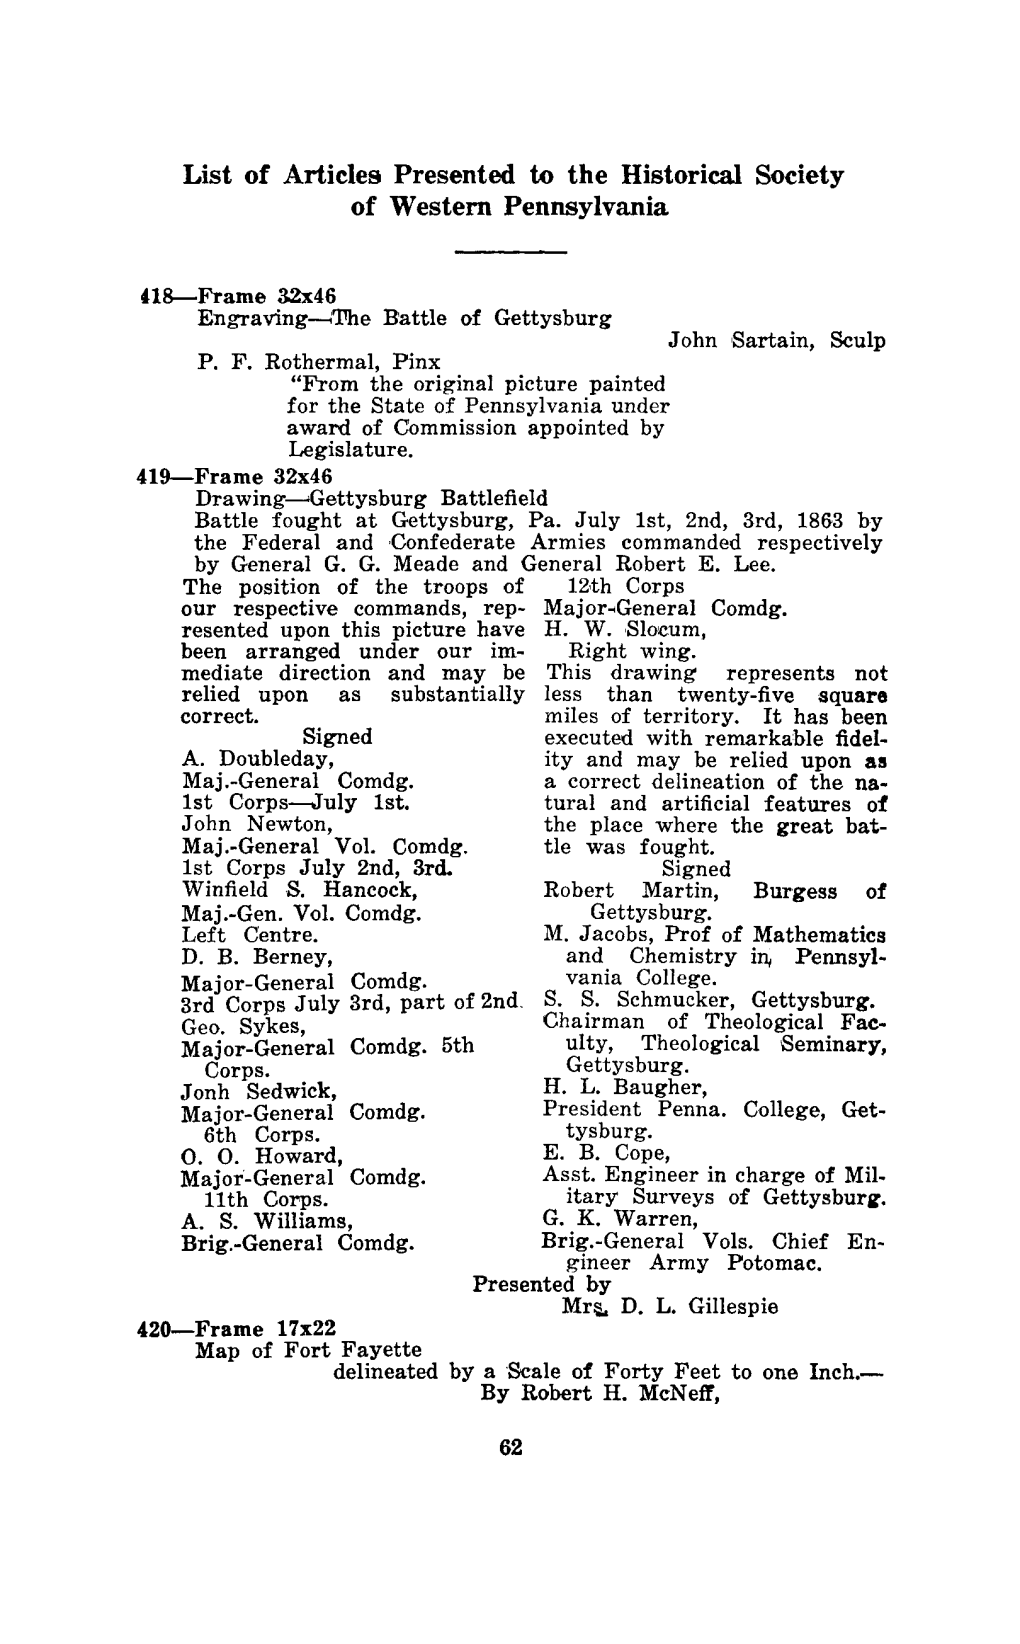 List of Articles Presented to the Historical Society of Western Pennsylvania